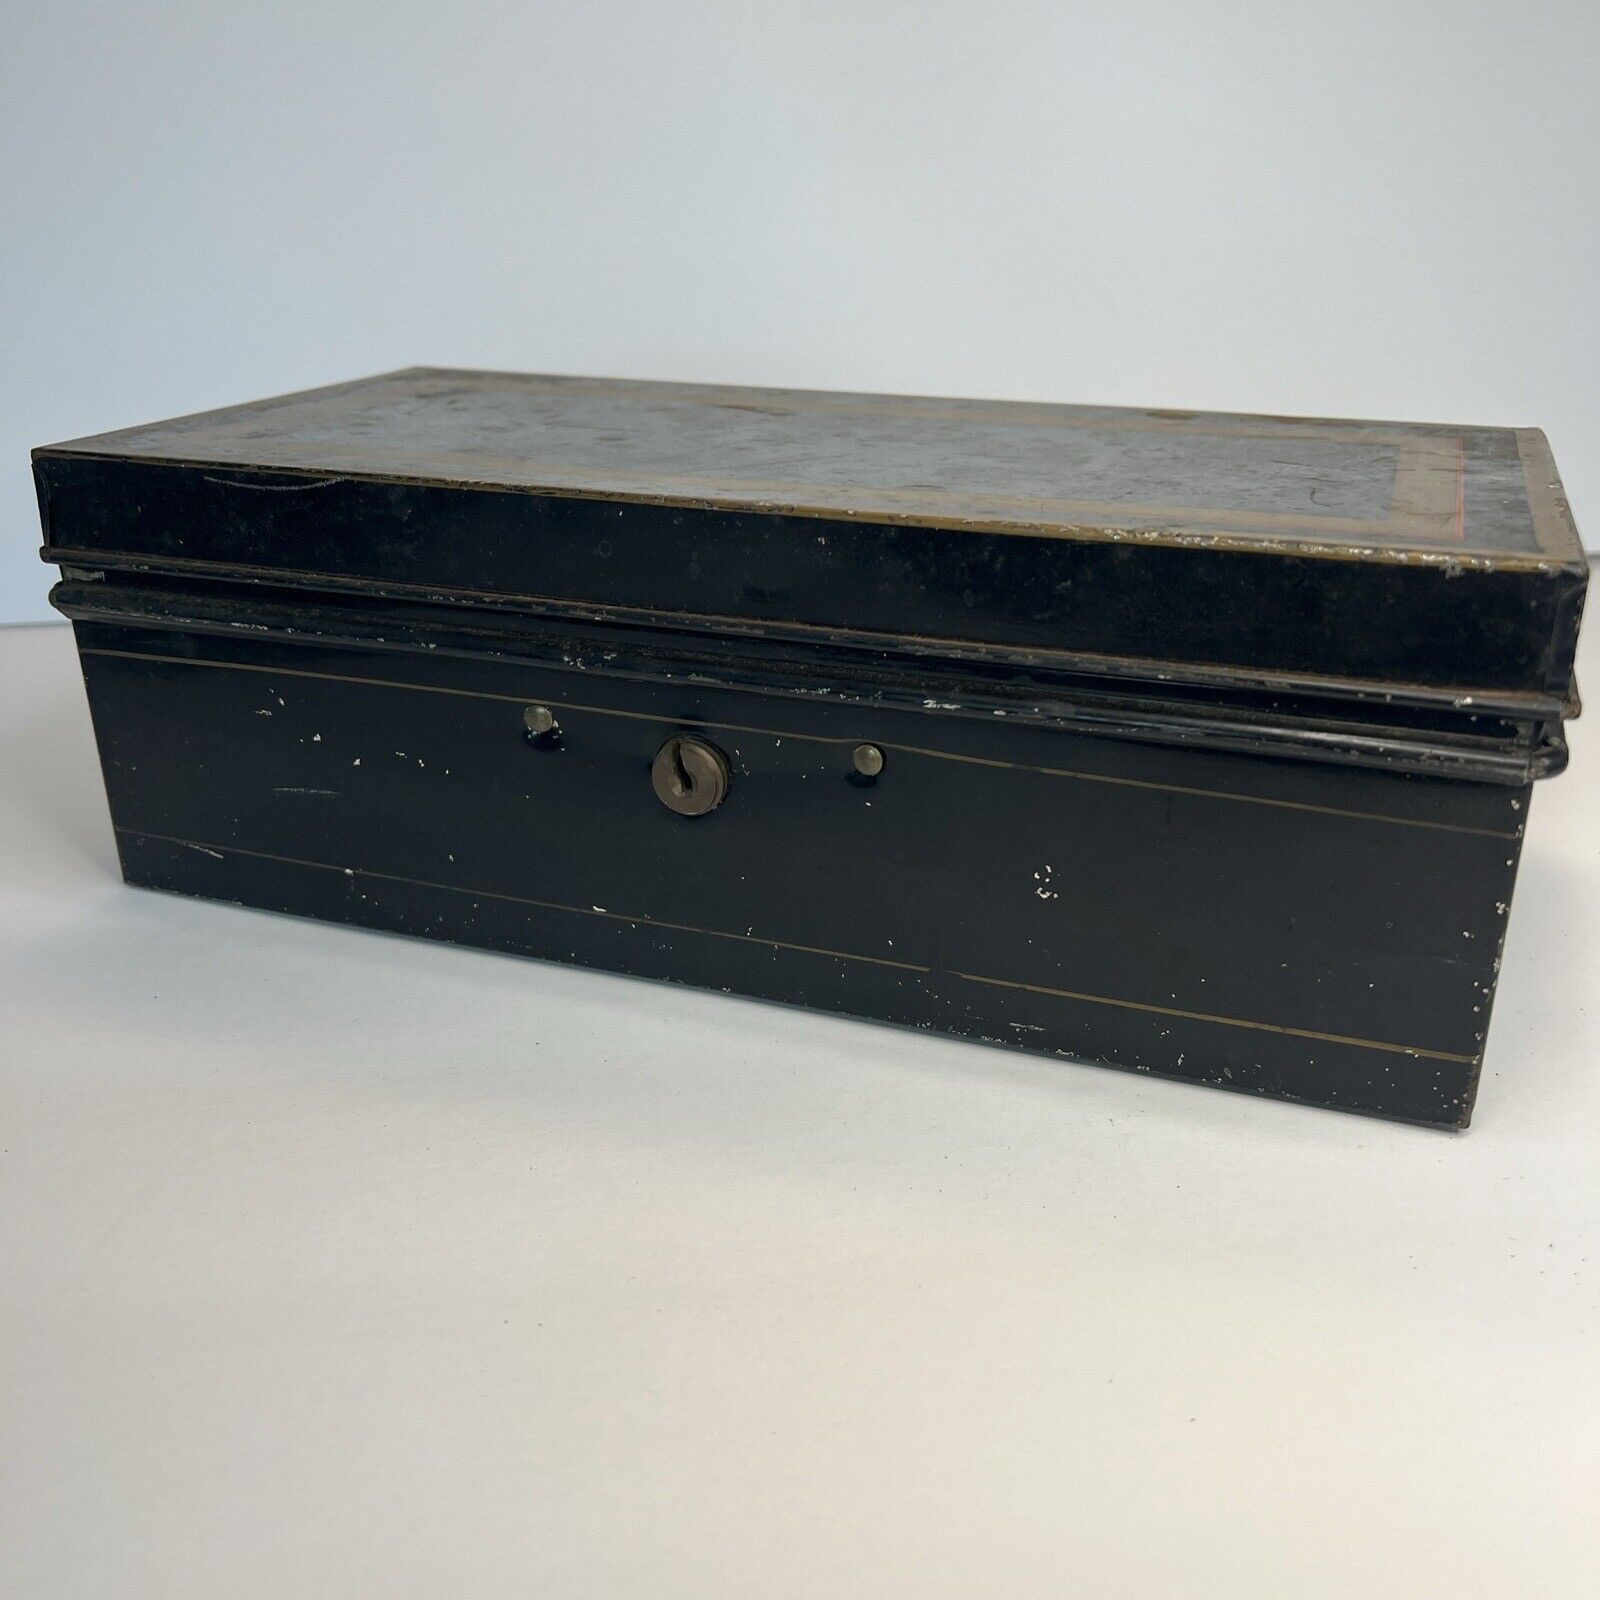 Antique Black Toleware Metal Document Cash Box Early 1900s (LL)